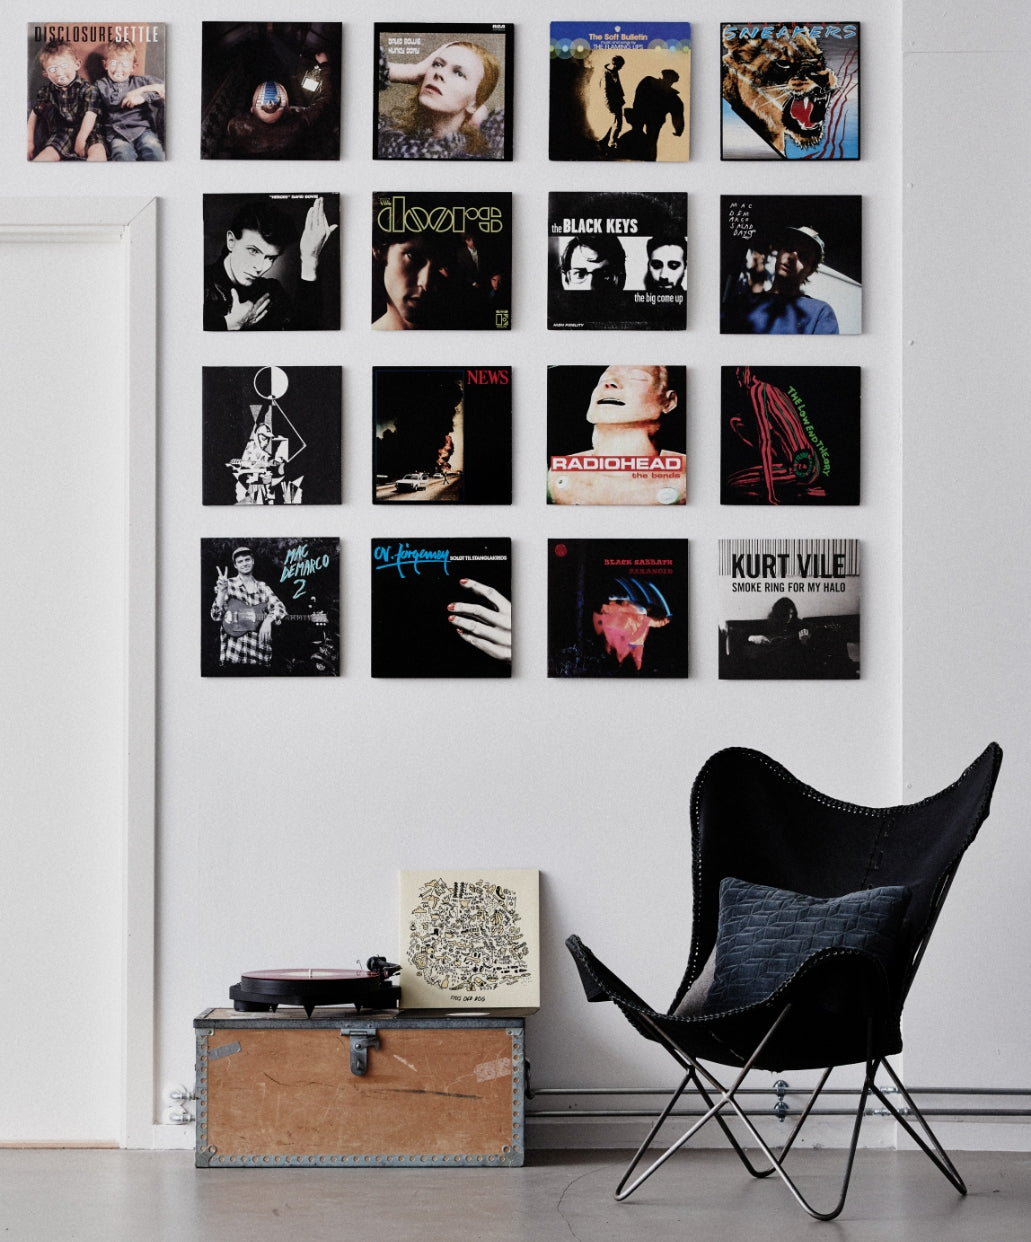 Big album art gallery mounted on the wall with the Twelve Inch Original, in a minimalist room